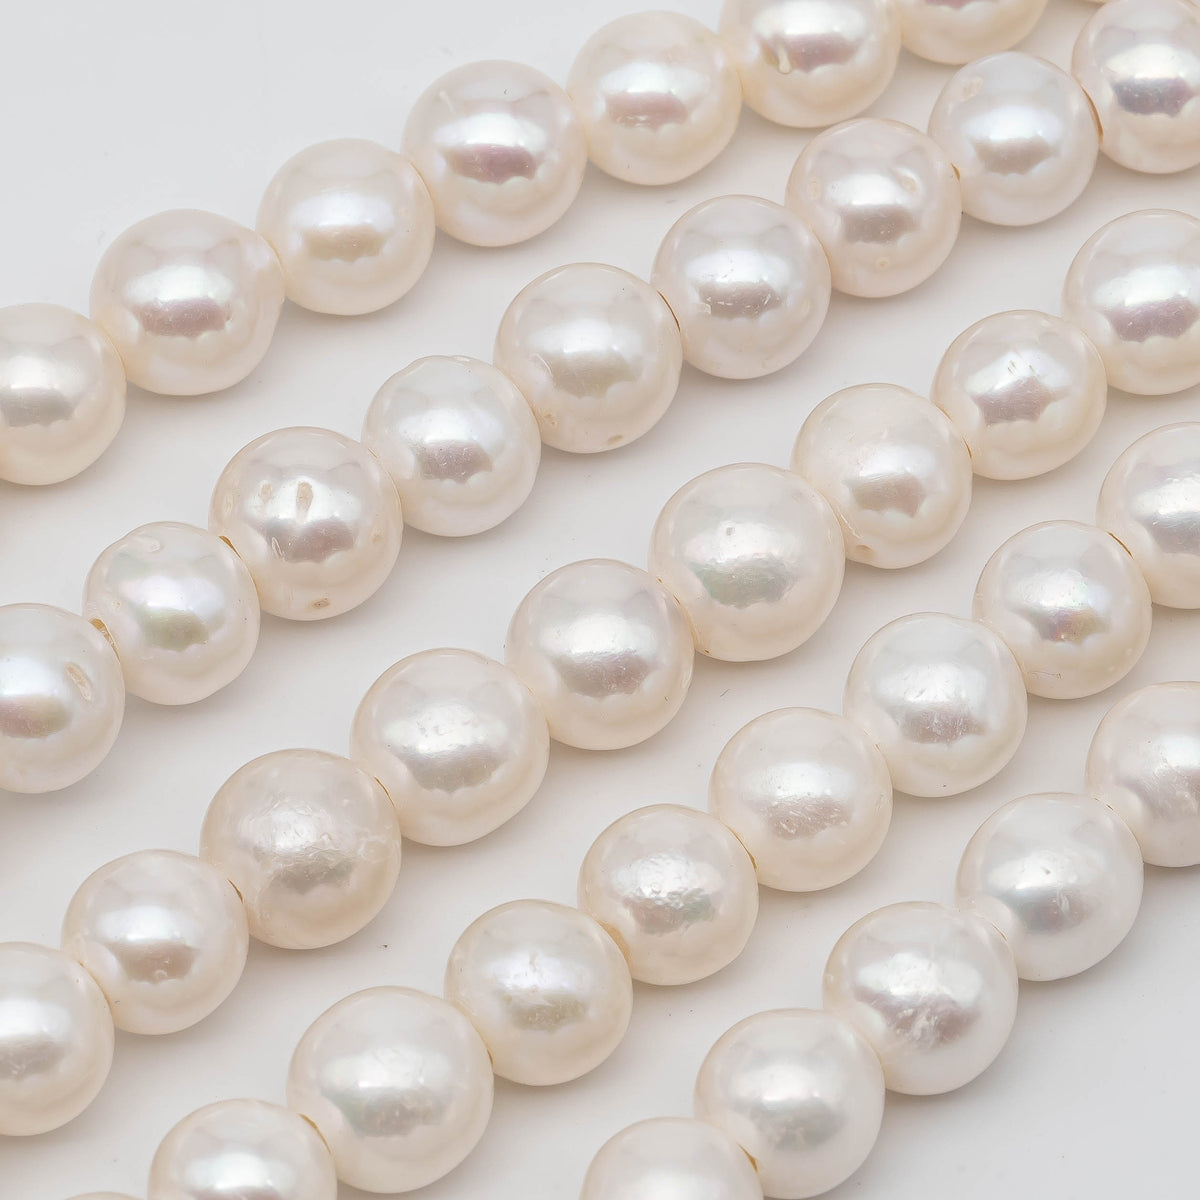 12-14 Mm Large Hole White Graduated Freshwater Pearl With Ring Hole Size  2.0 Mm, Large Hole White Freshwater Pearl Beads 106 